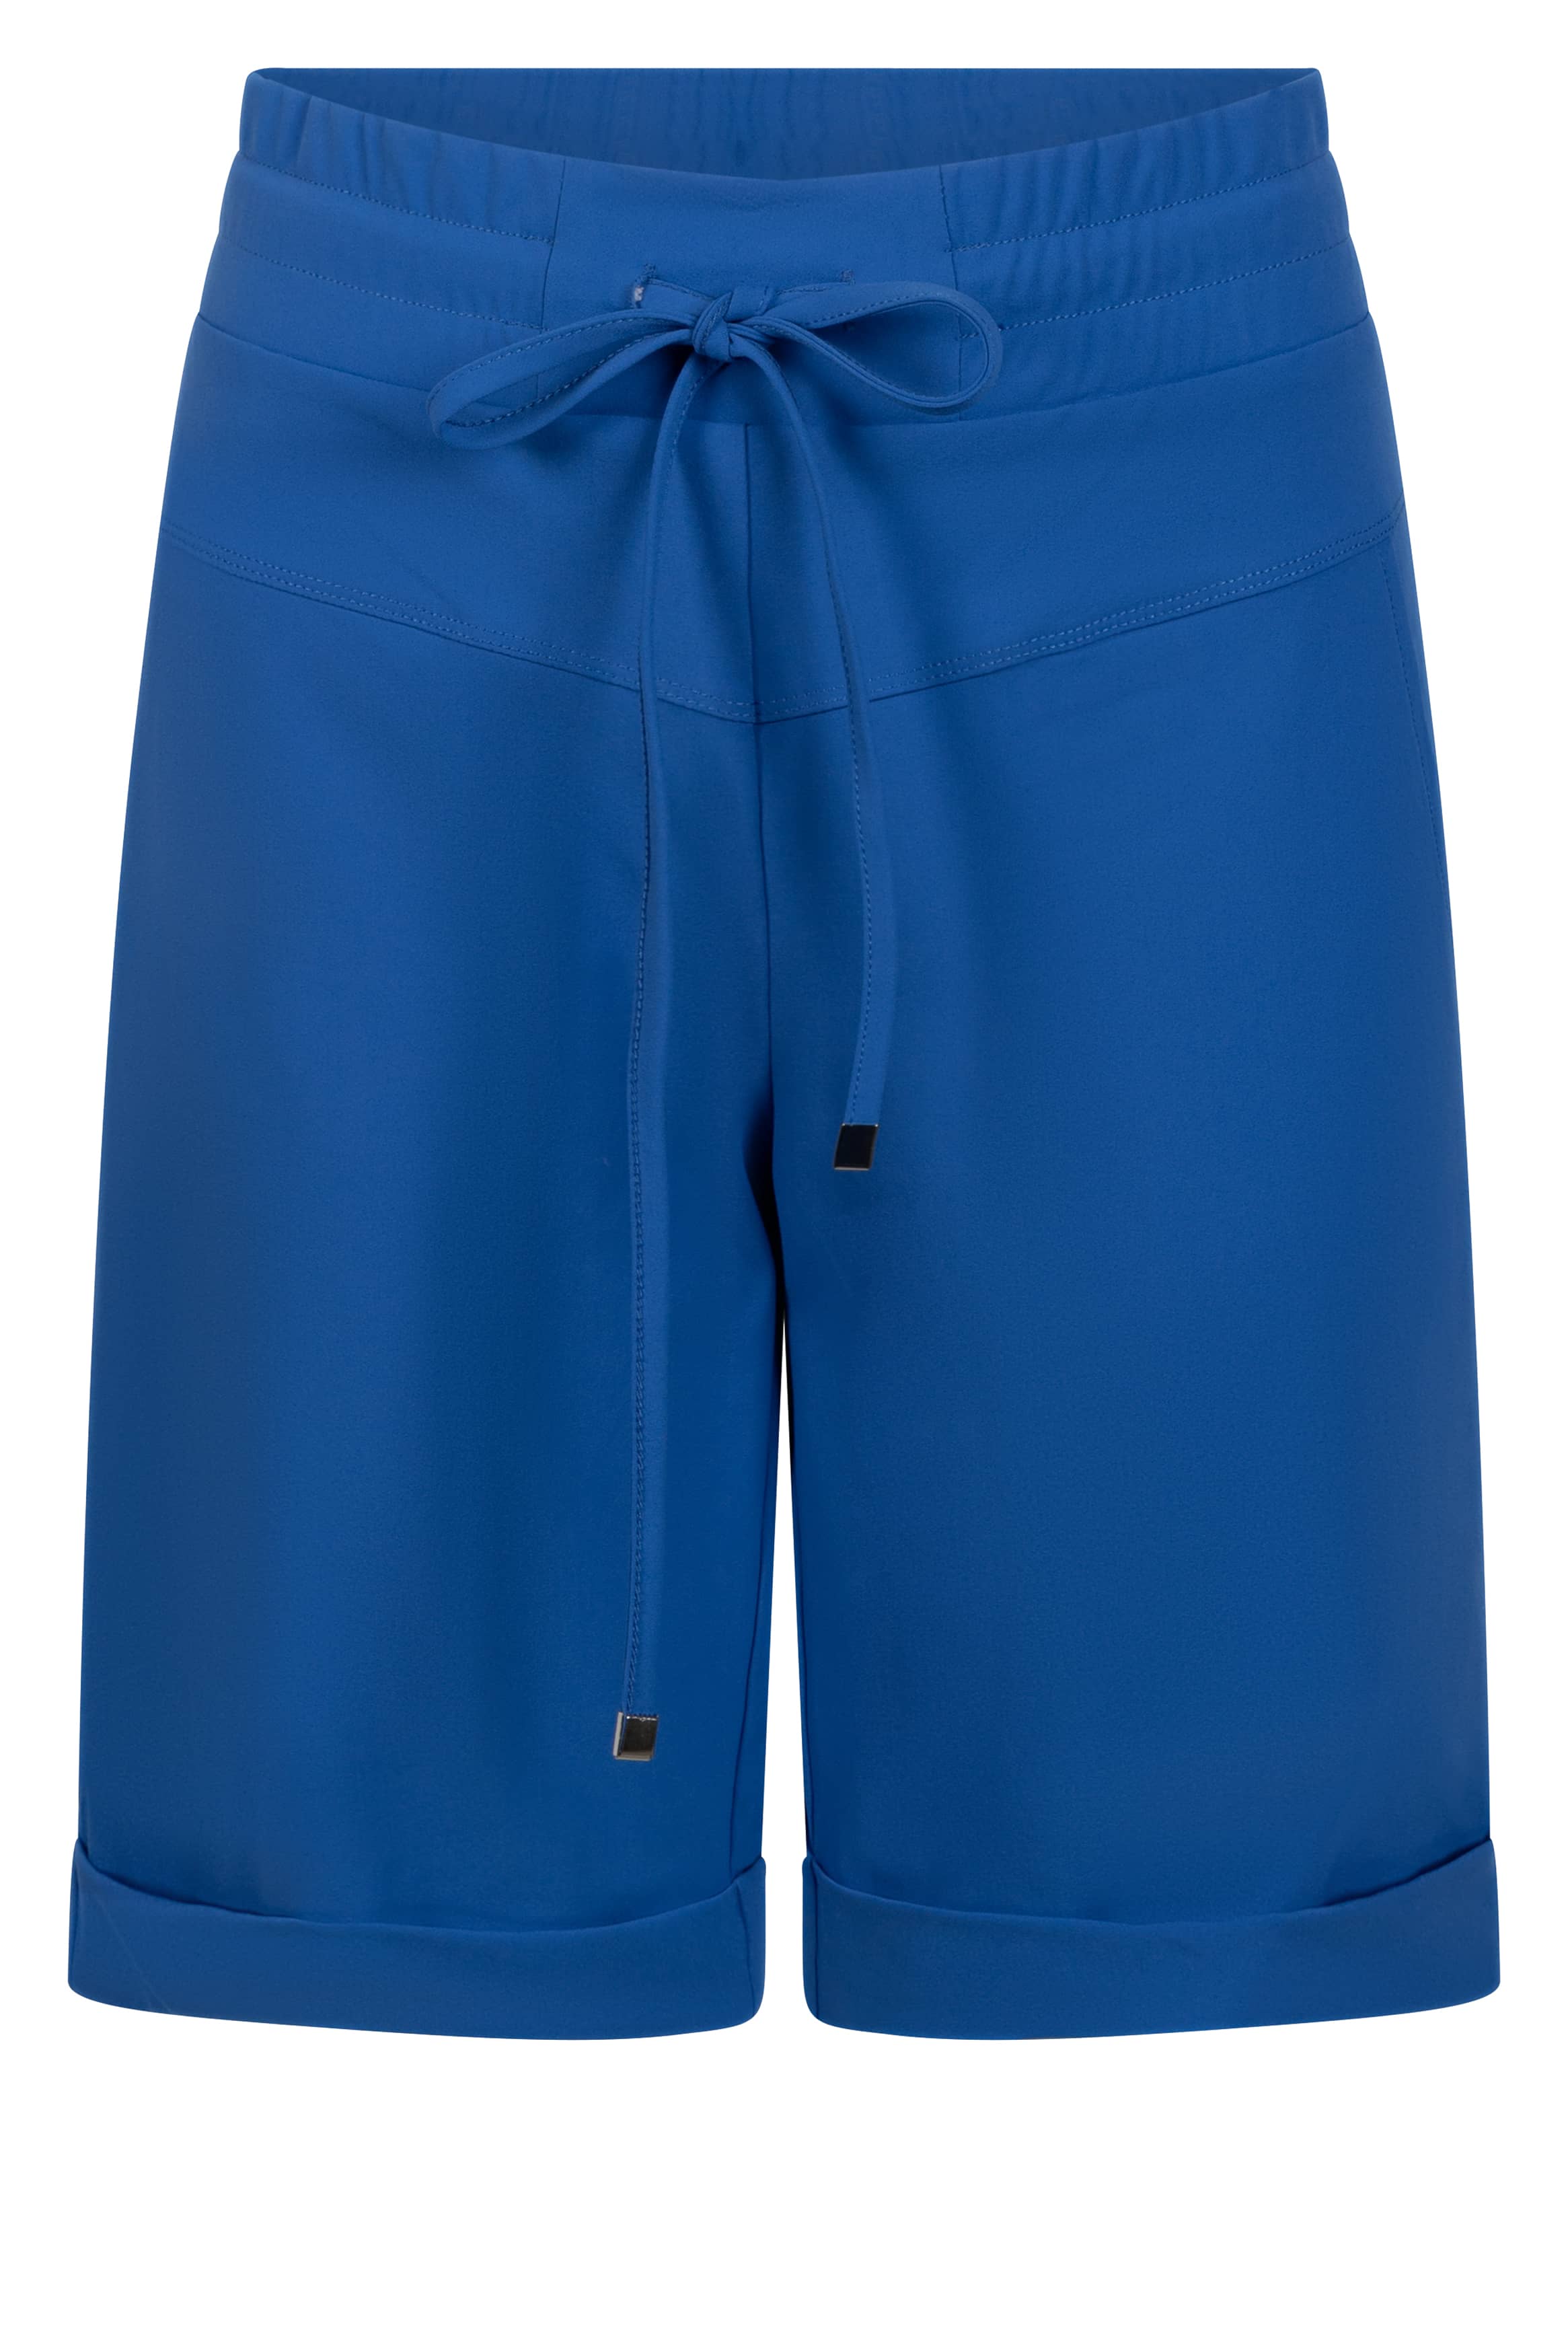 Bowie Travel Shorts in Strong Blue